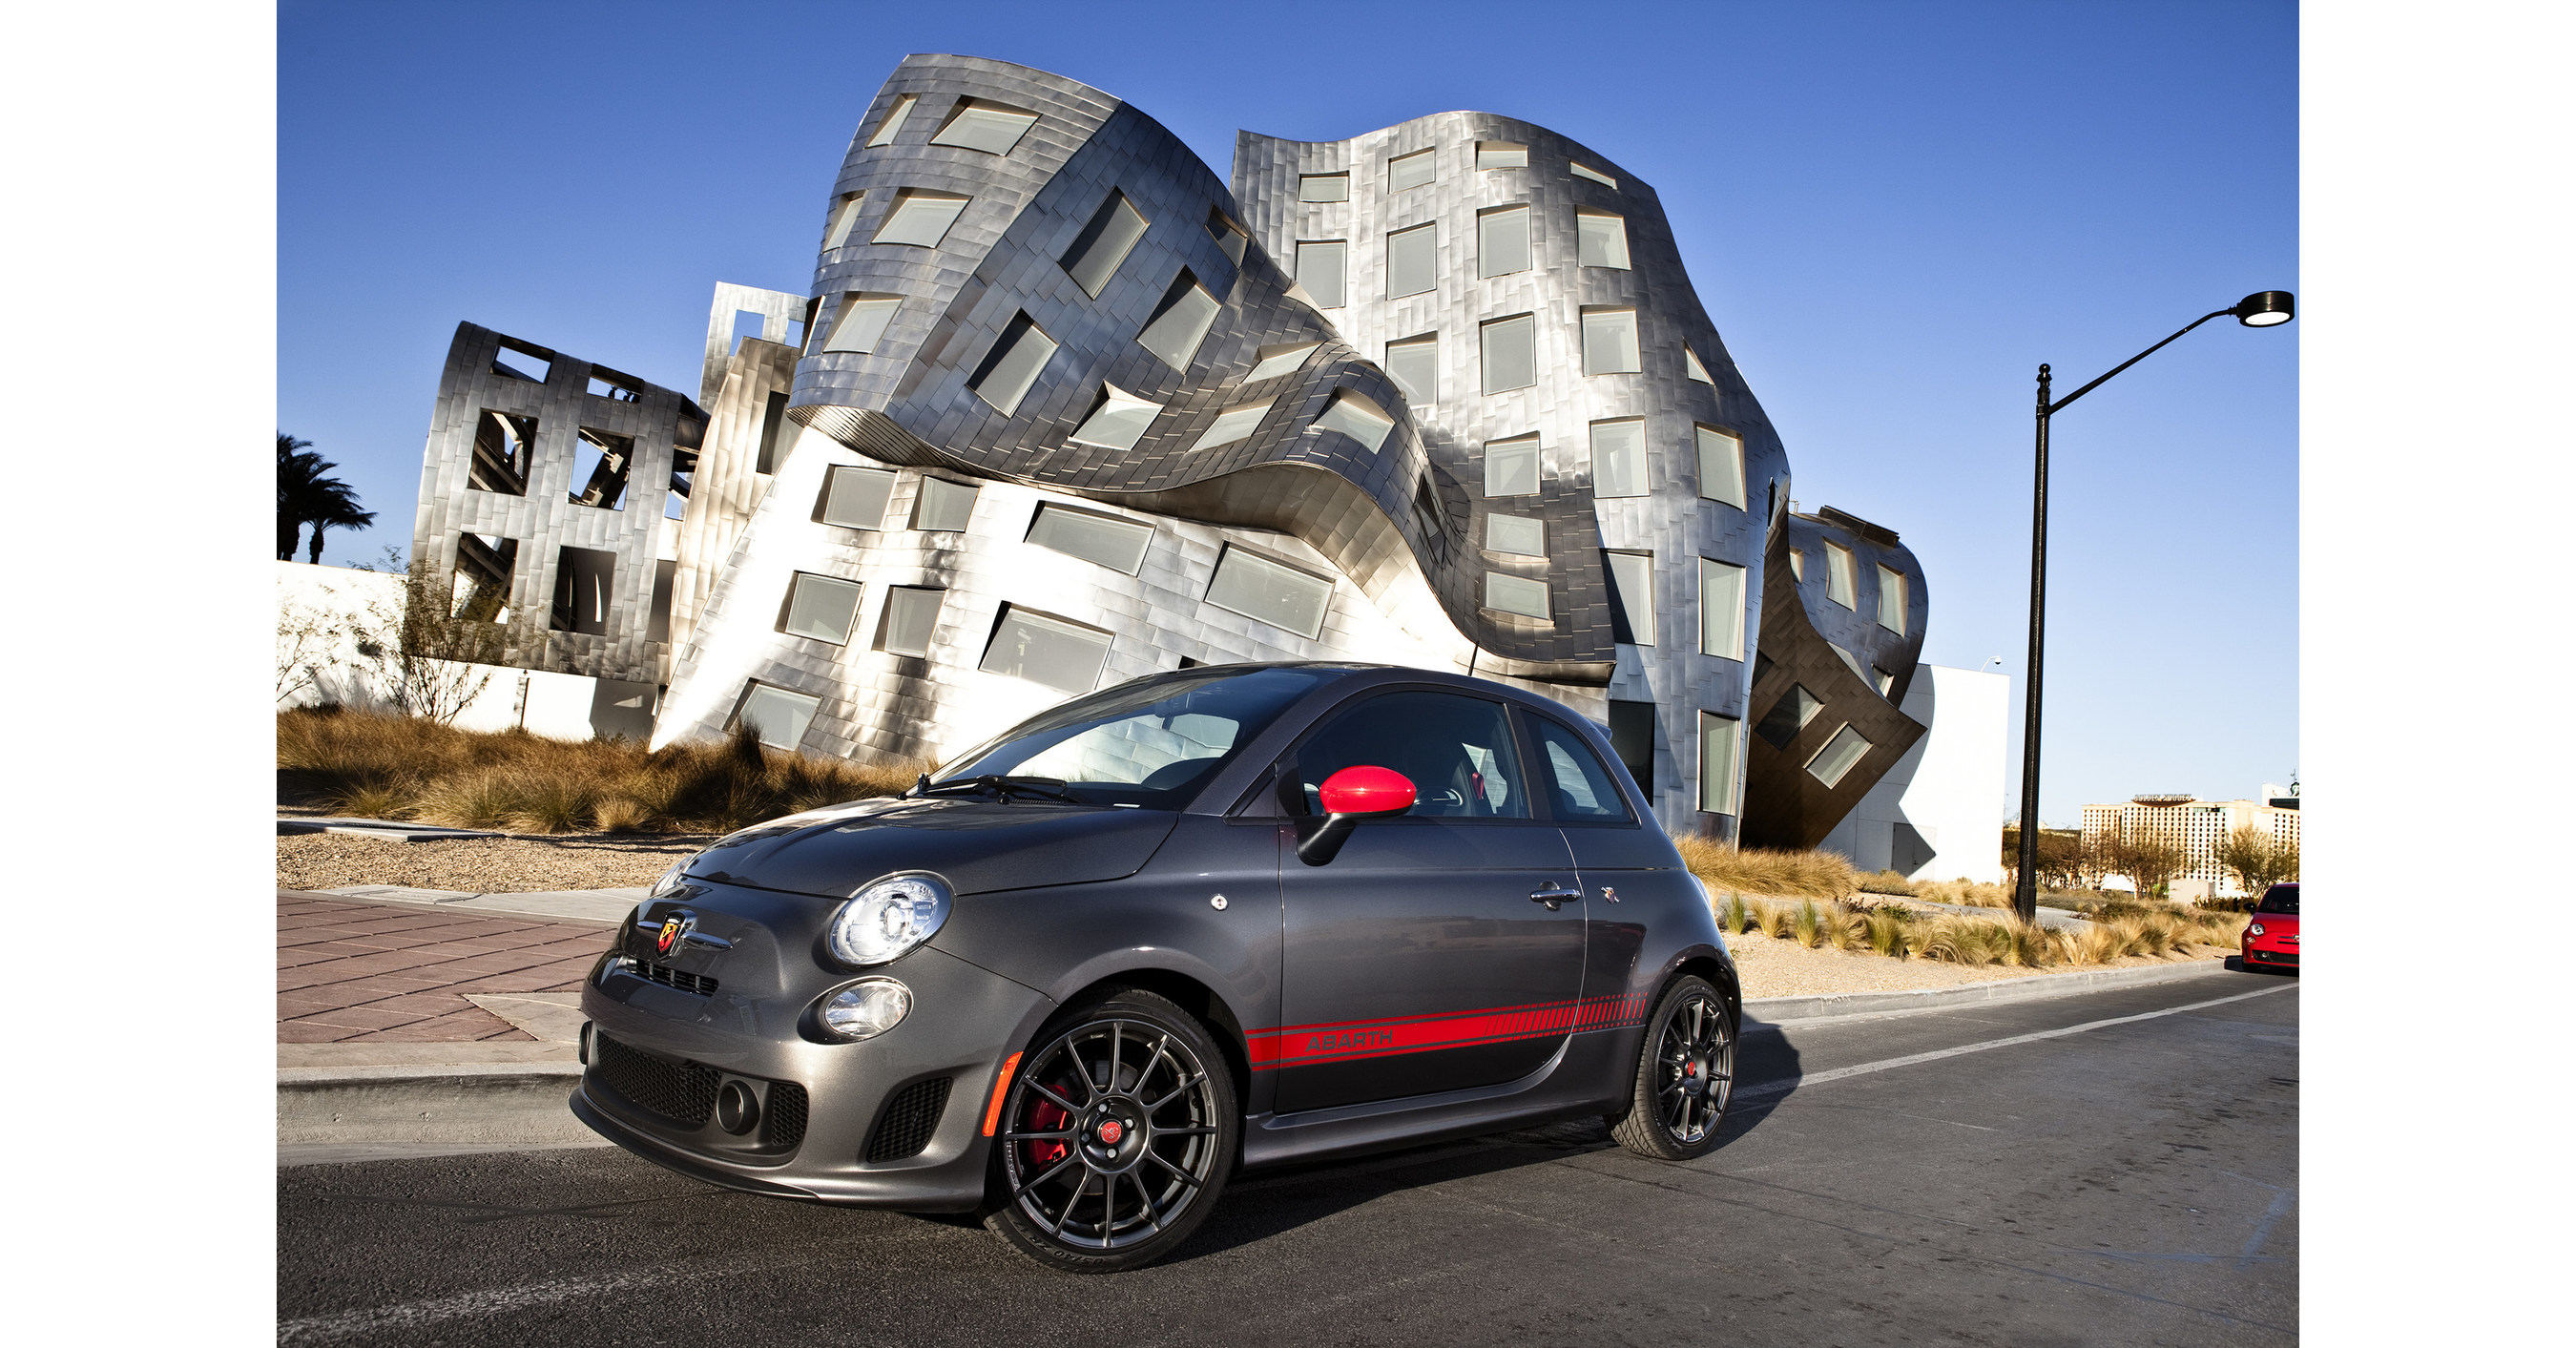 Fiat 500 Abarth Named One of 2018's 'Fastest Cars for the Money